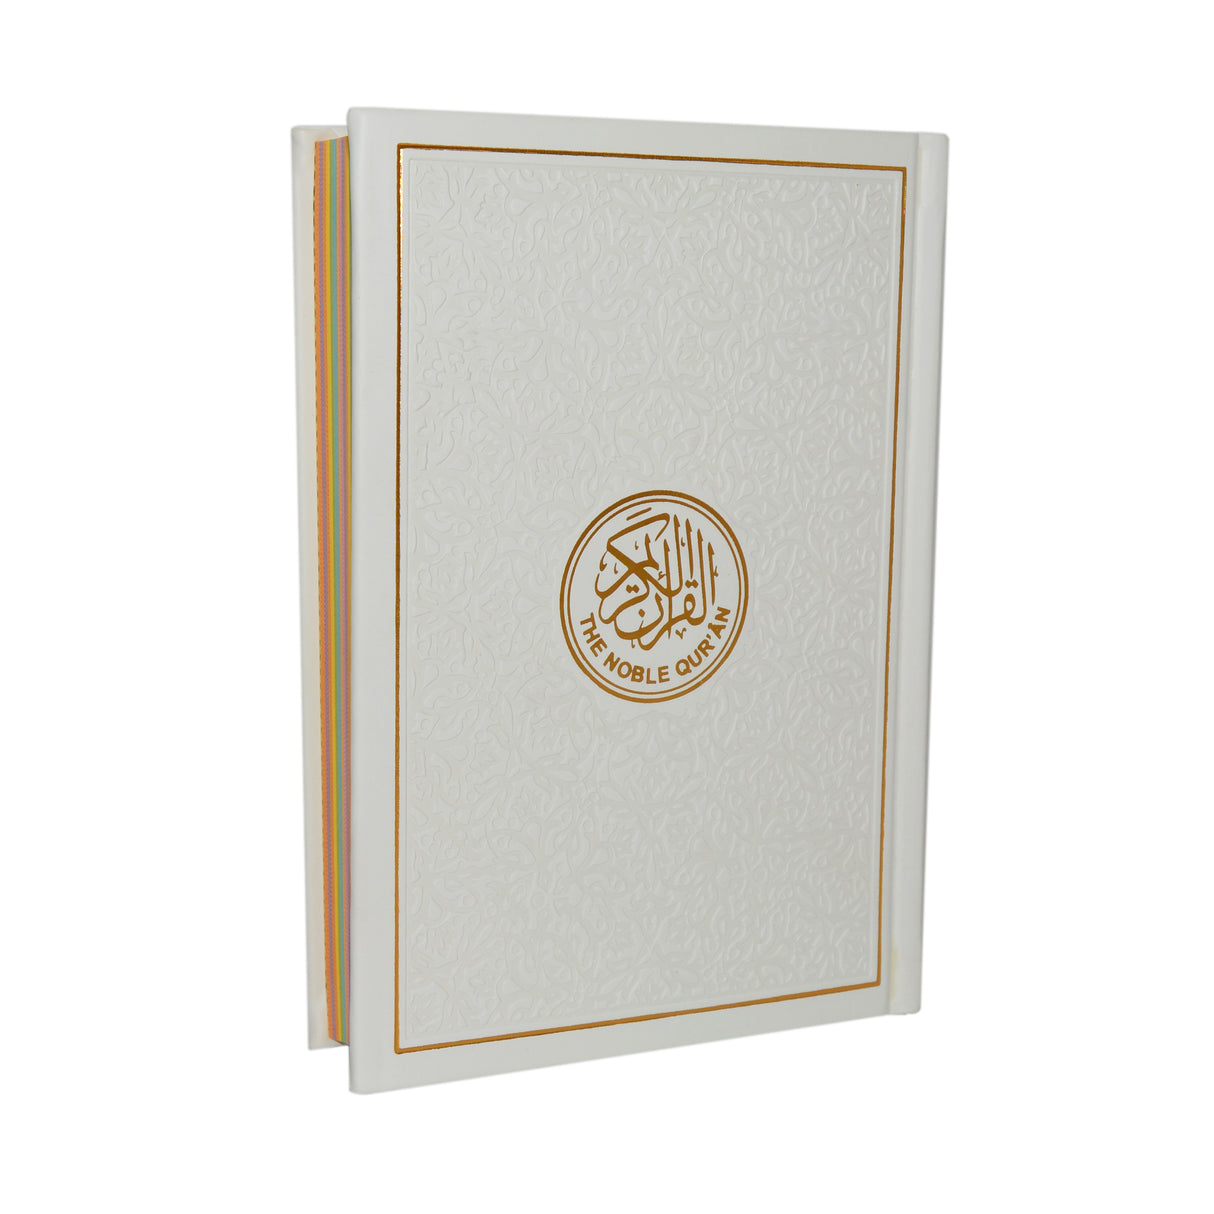 Noble Quran English Translation 20X14 Colored Page